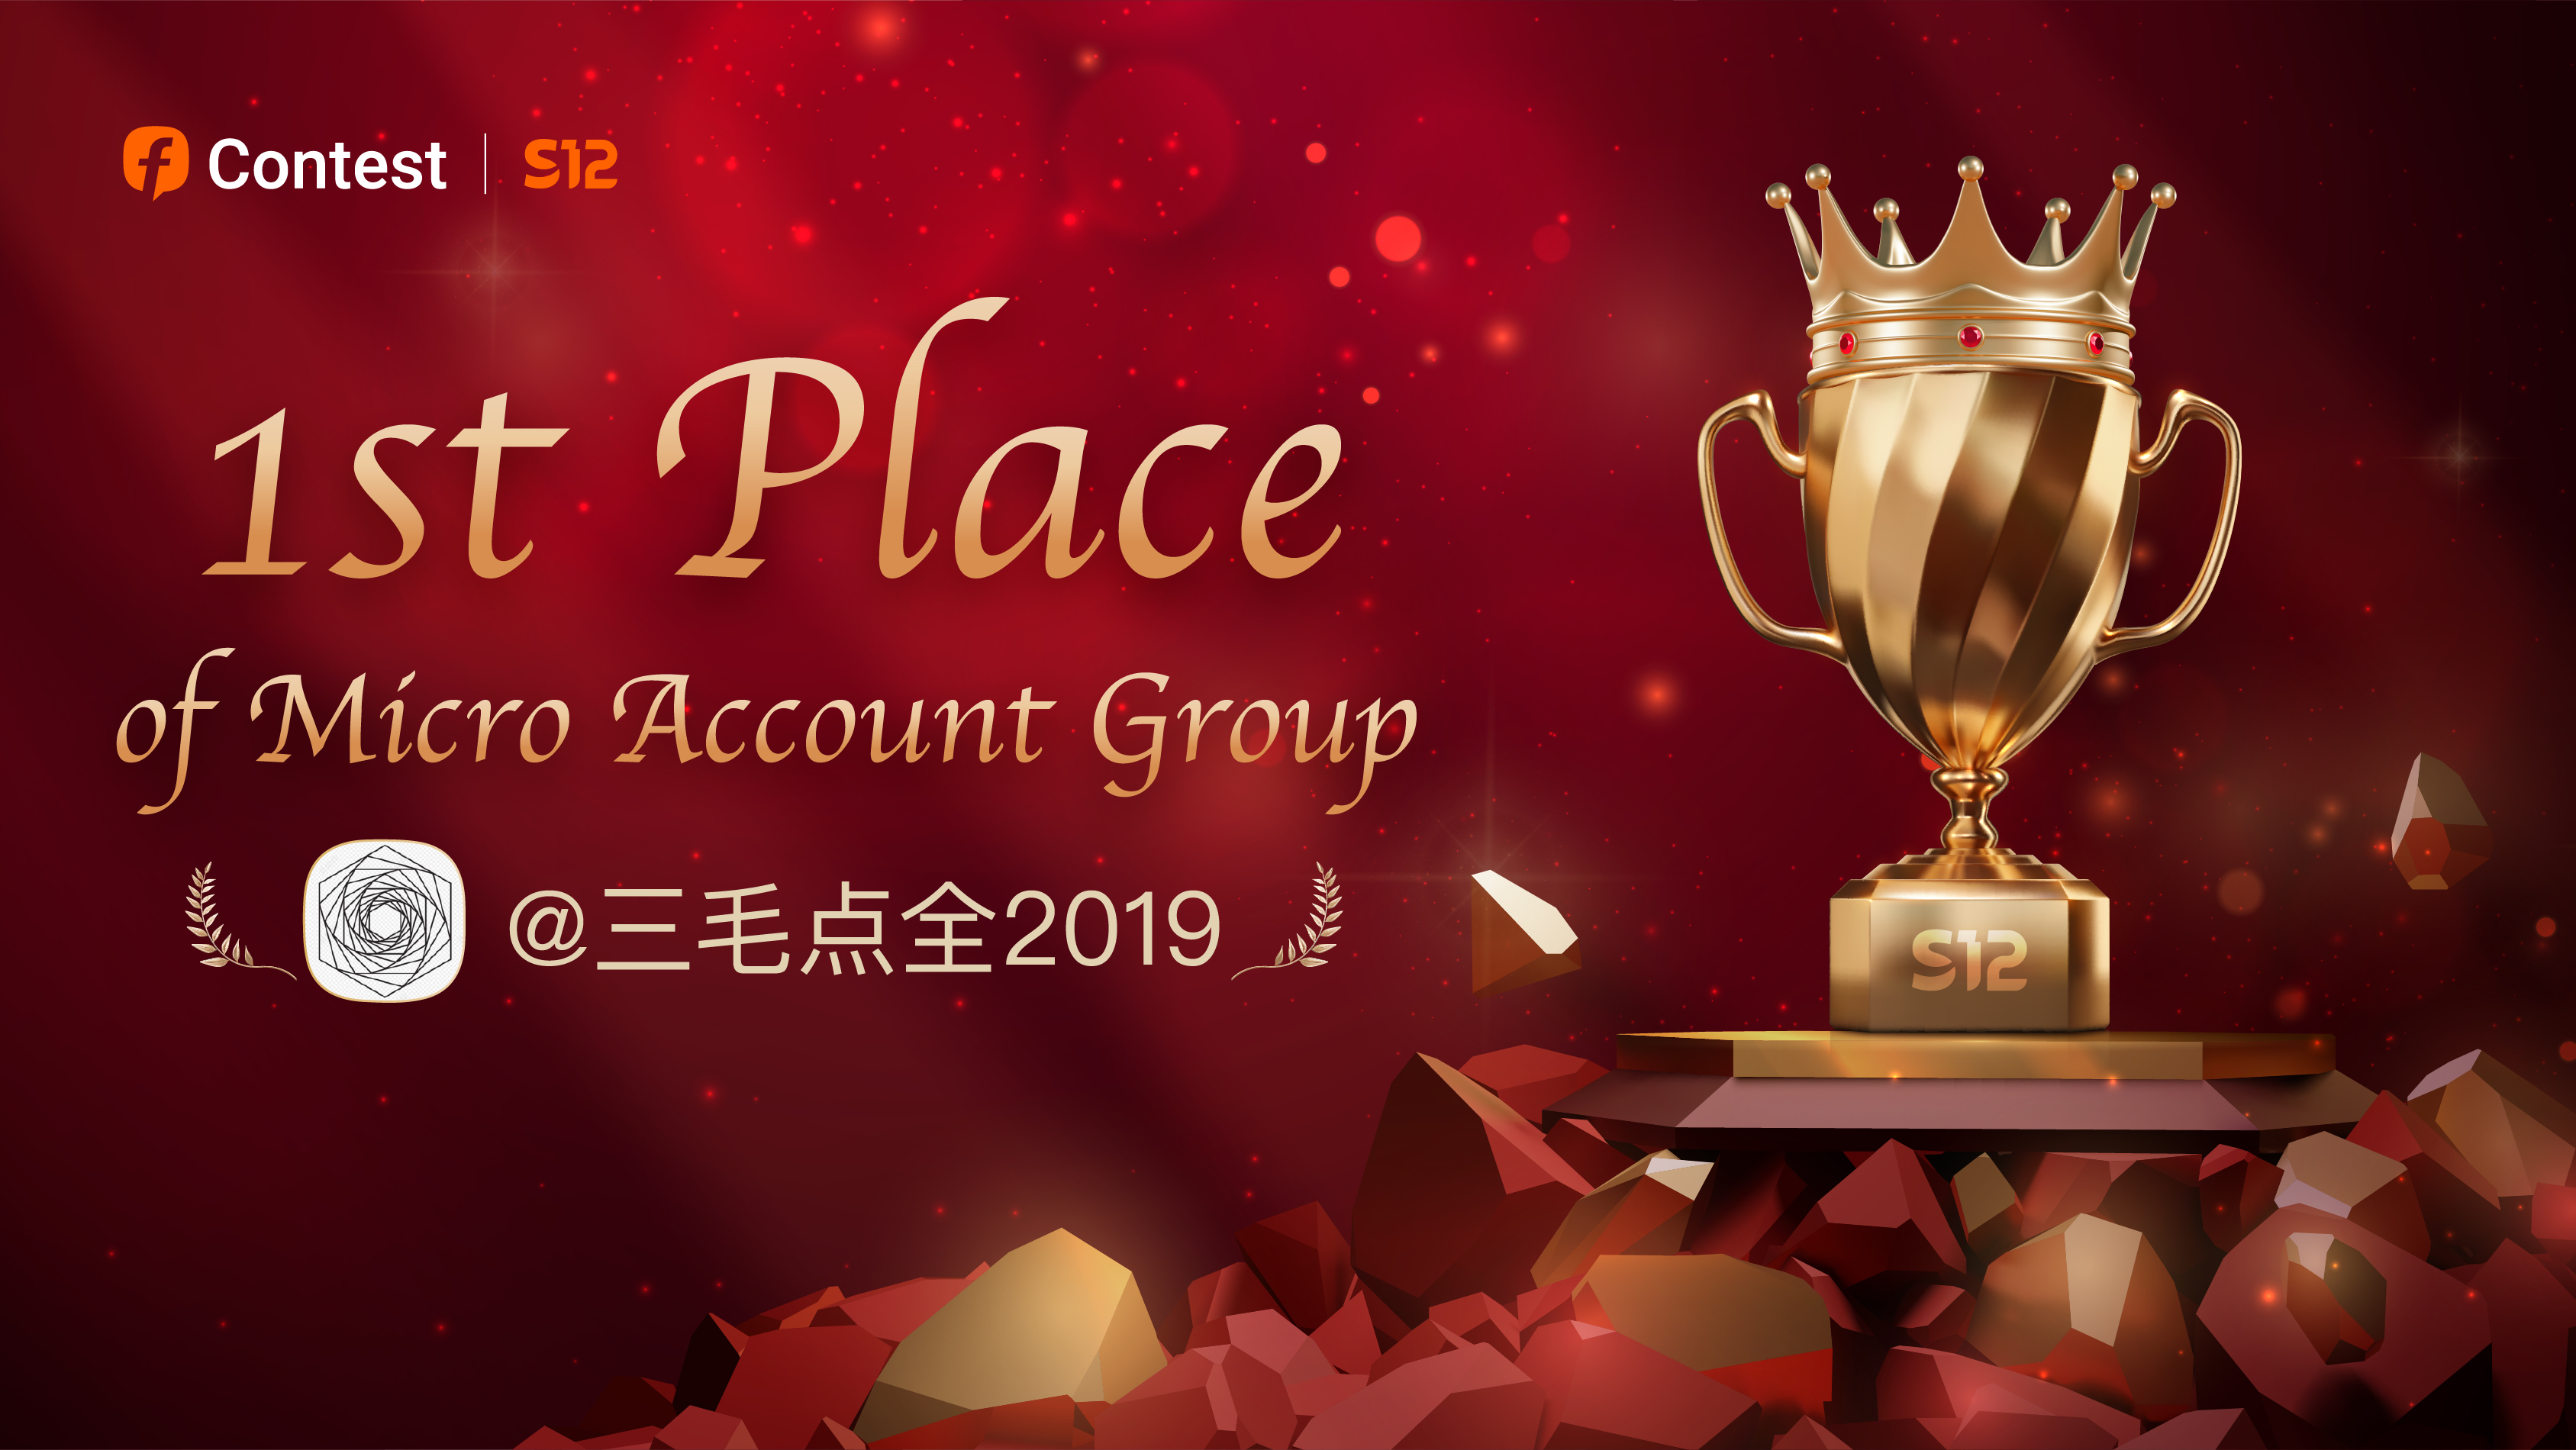 S12 | Share Moment for 1st Place of Micro Account Group